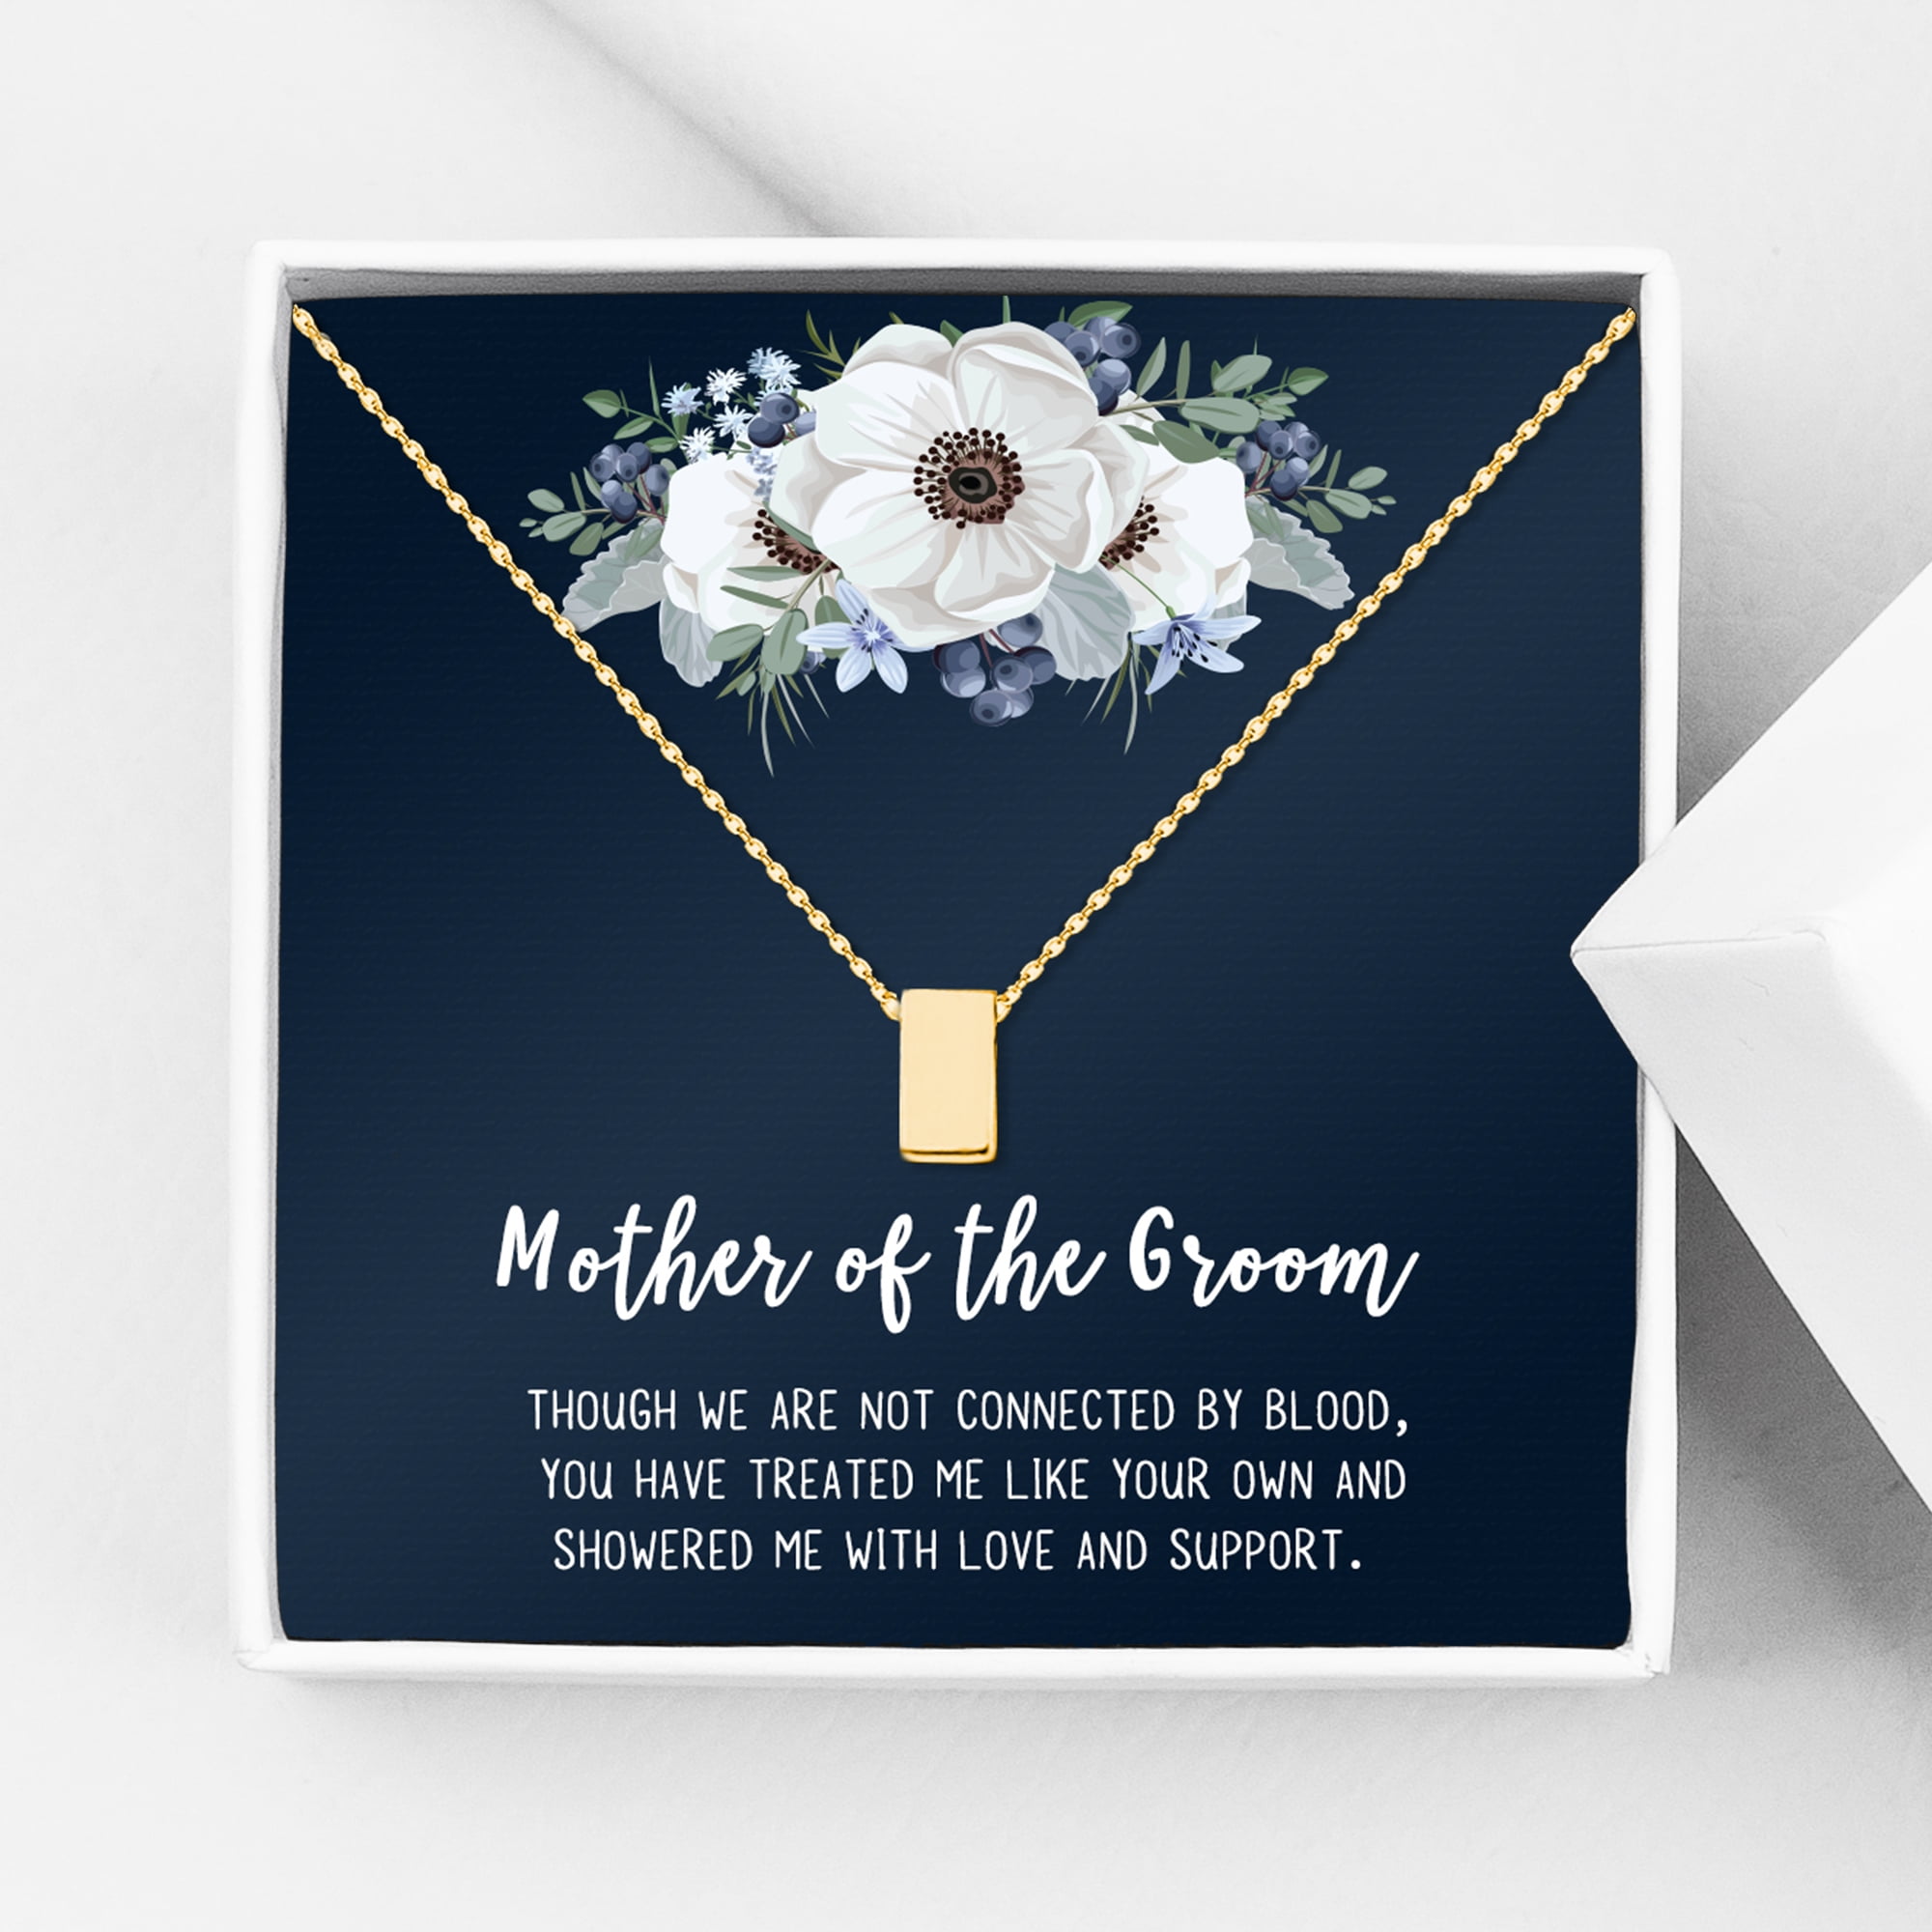 Mother of the Groom Gift / Mother of the Bride Gift / Bridal Shower Gift /  Gift for Mom / Mother in Law Gift / Ring Dish / Wedding Gift 